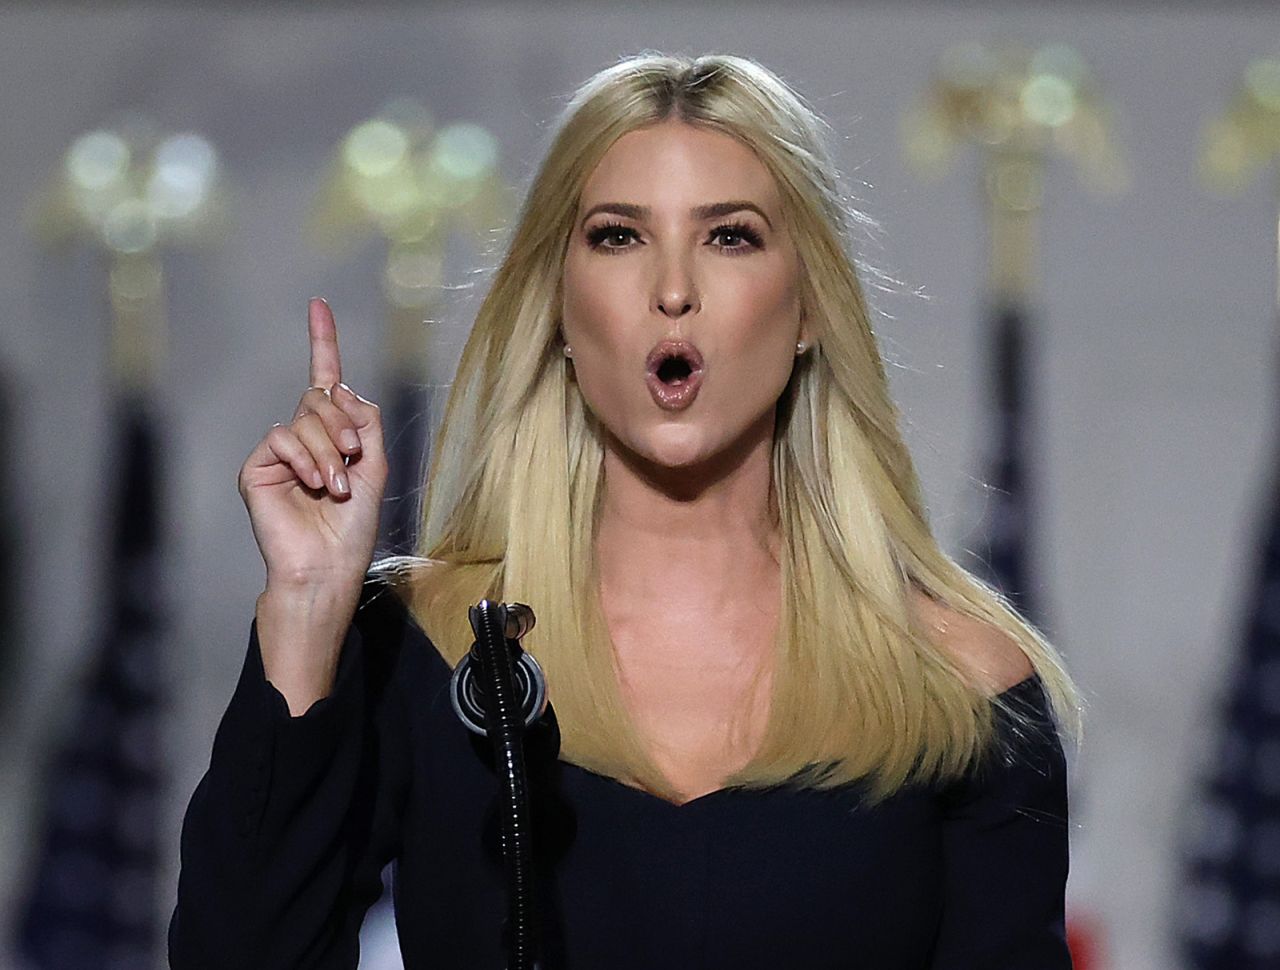 Ivanka Trump, daughter of President Donald Trump and White House senior adviser, addresses attendees as Trump prepares to deliver his acceptance speech for the Republican presidential nomination on the South Lawn of the White House on August 27 in Washington.